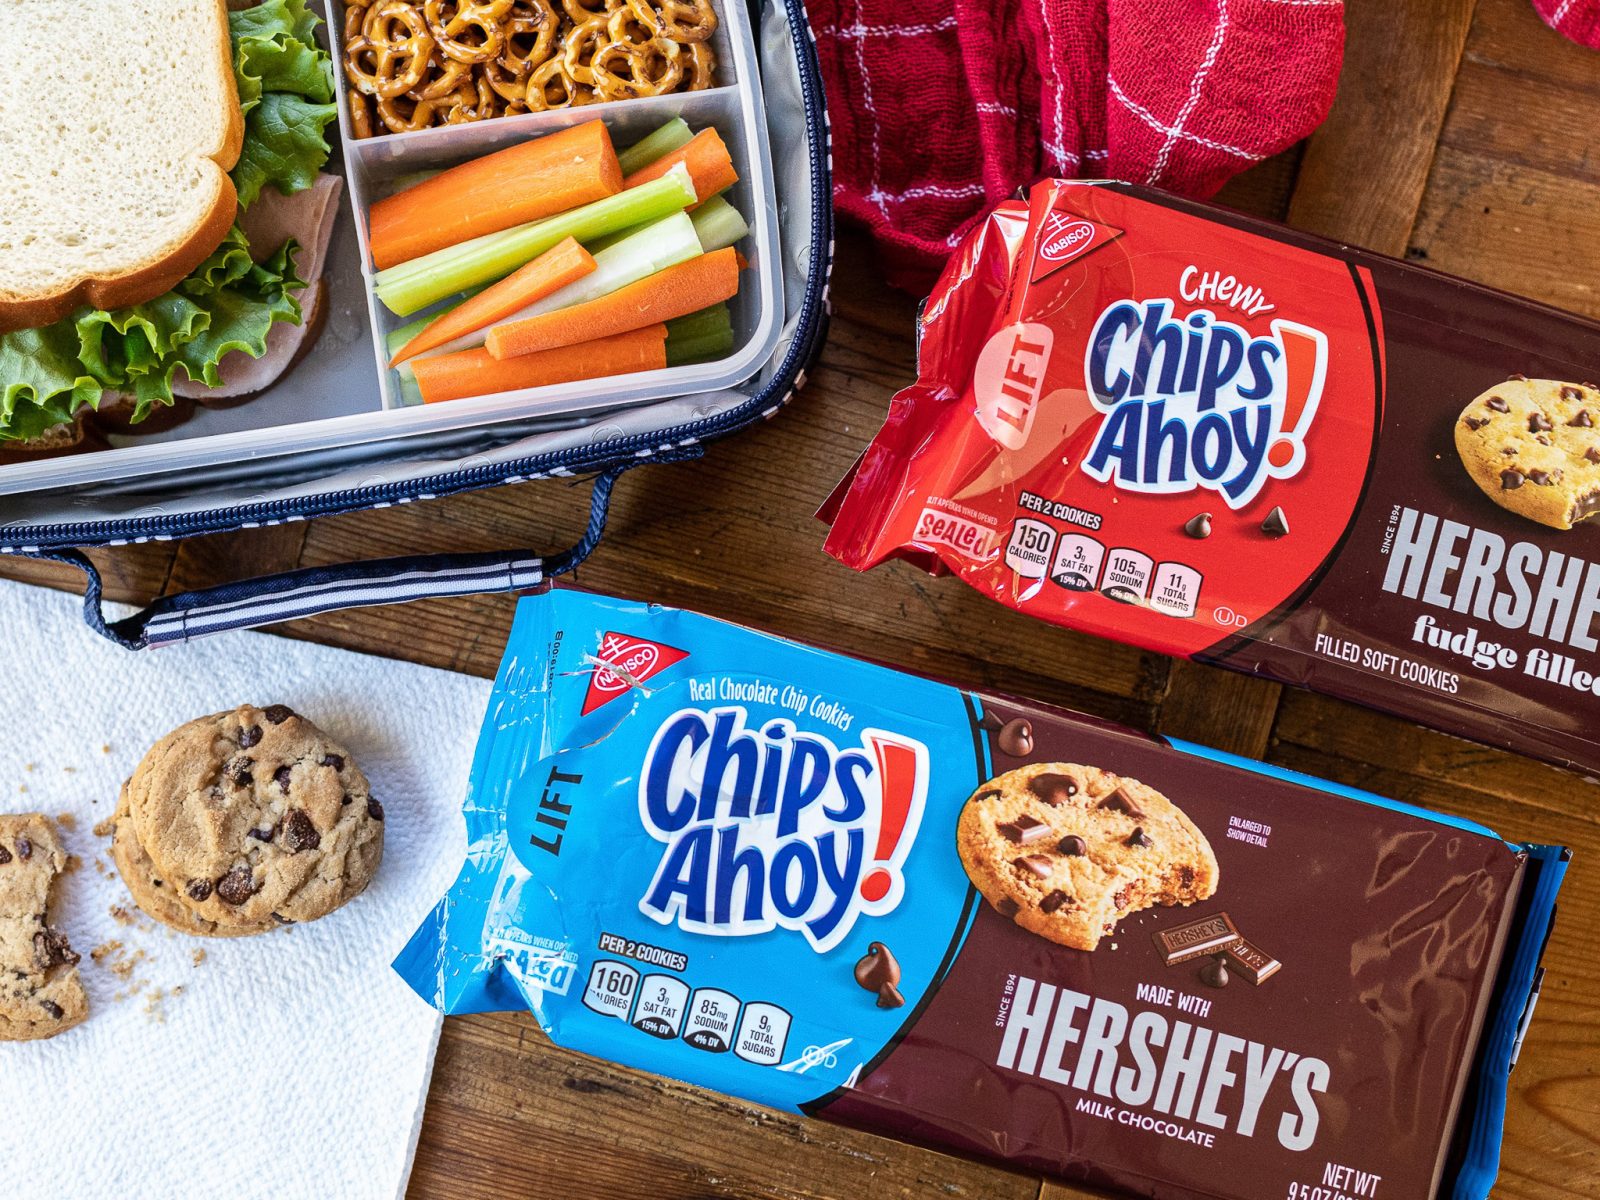 Get Nabisco Chips Ahoy! Hershey’s or Fudge Filled Cookies As Low As 85¢ At Publix